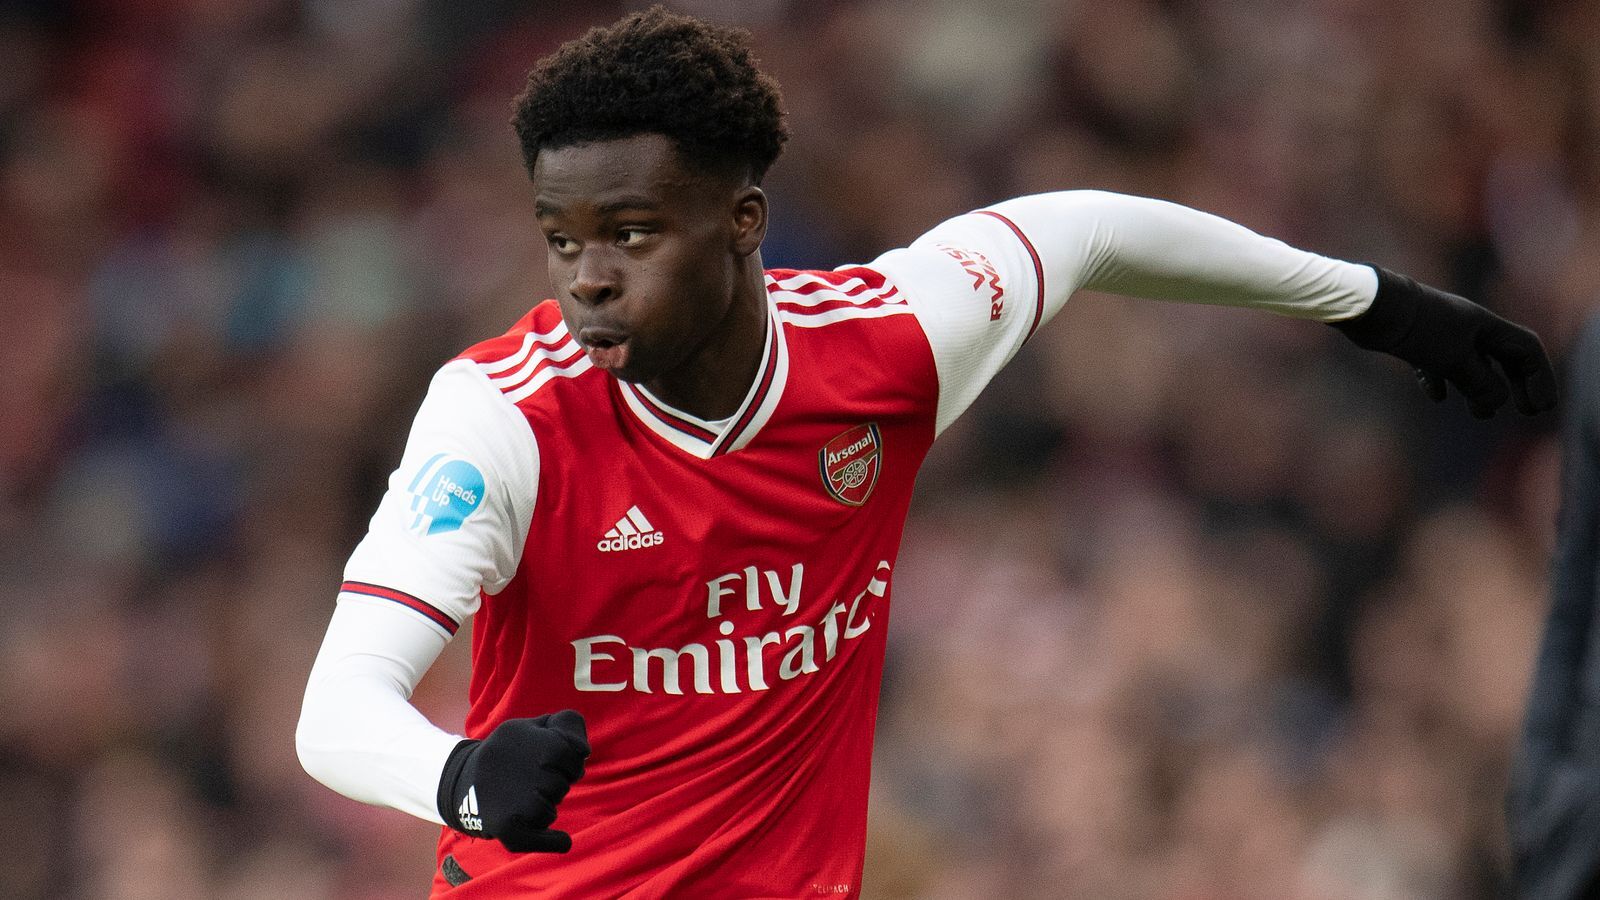 Bukayo Saka extended his deal with the club for long term